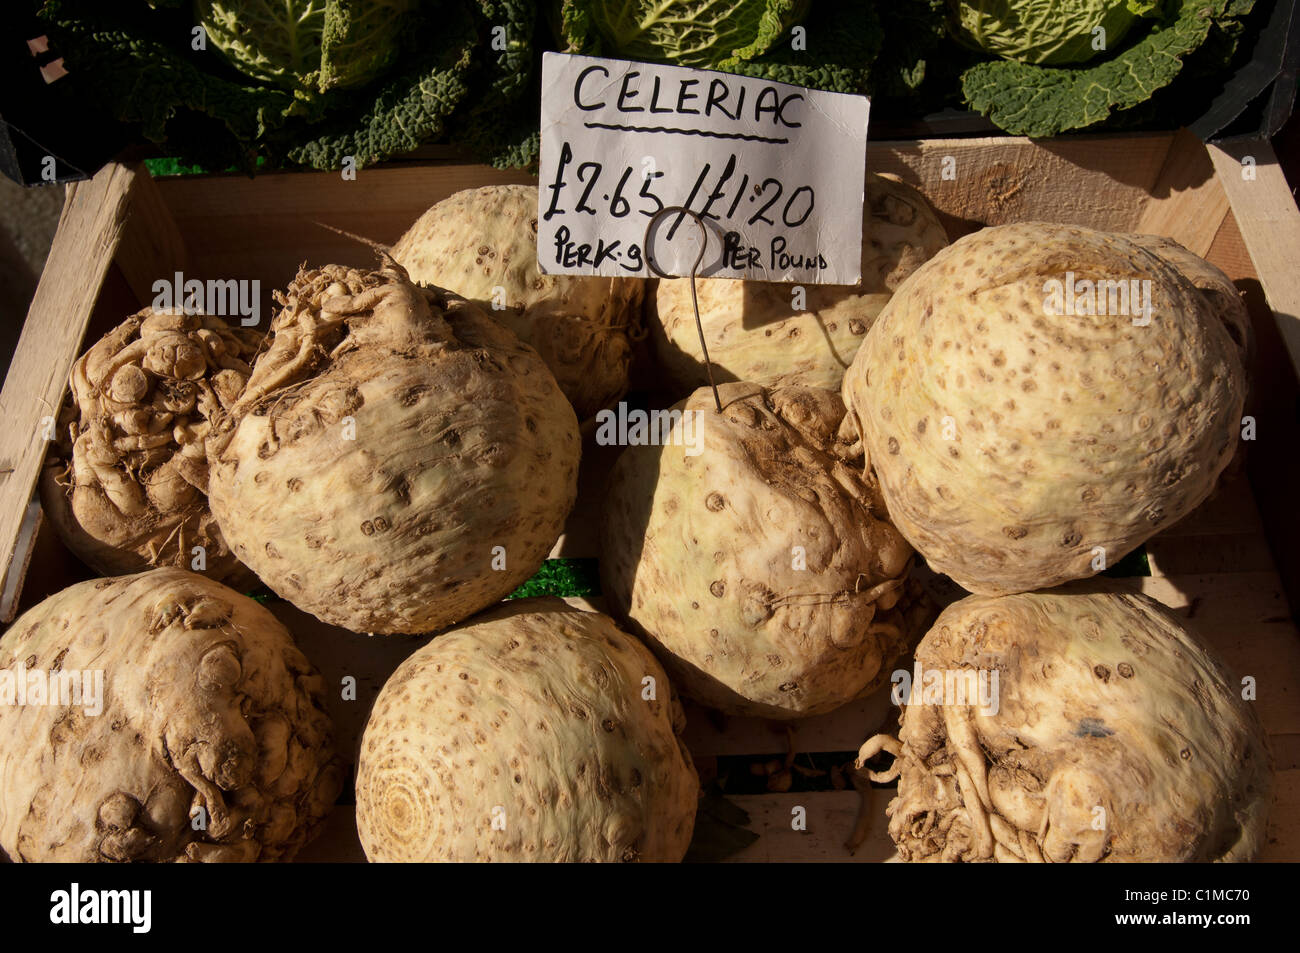 Celeriac root vegetable on sale in a greengrocers shop UK Stock Photo